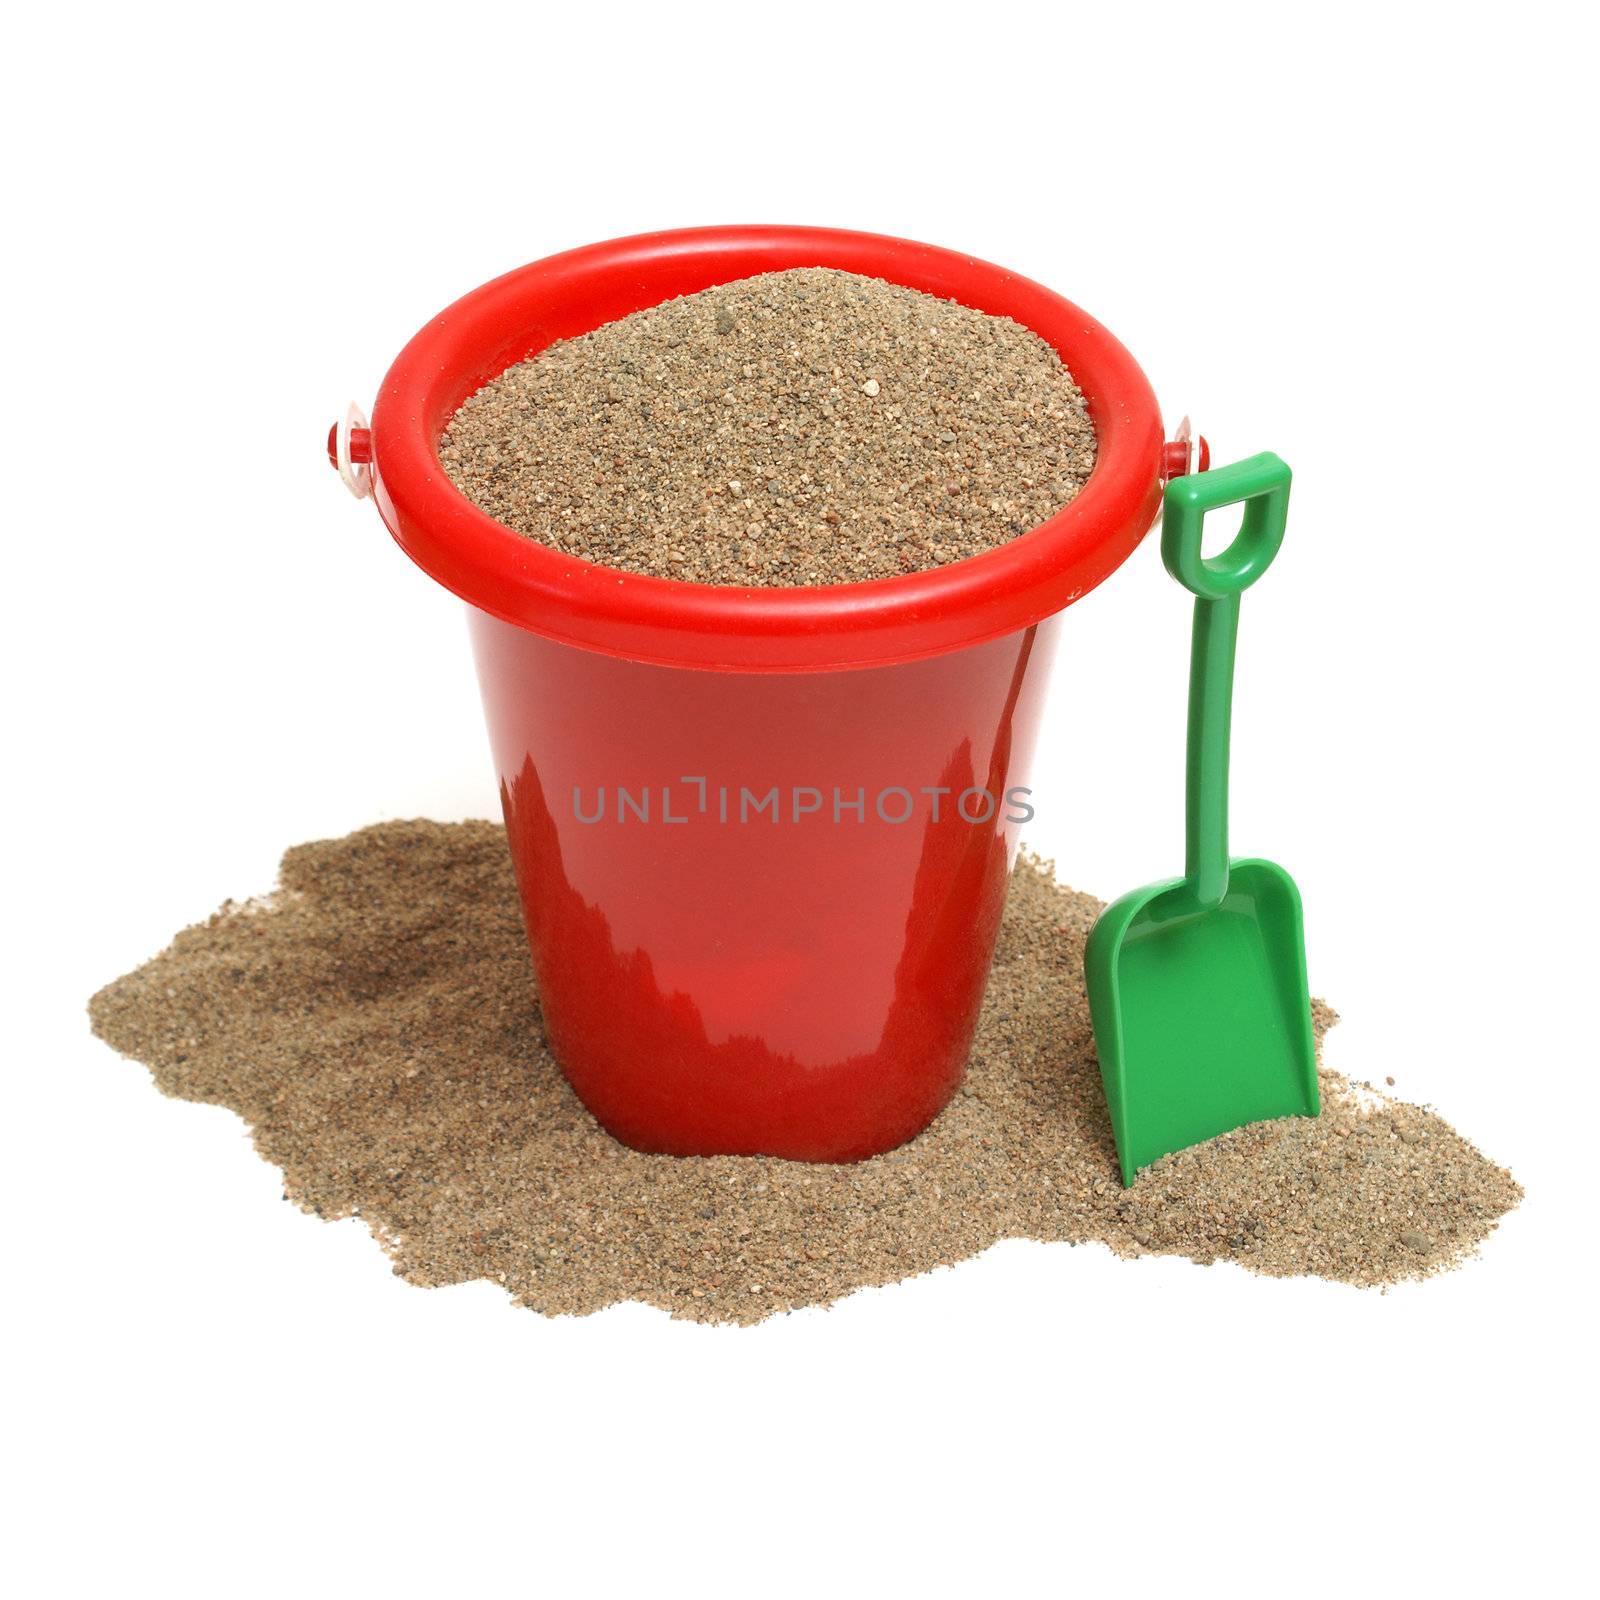 An isolated shot of a bucket of sand for the childrens play time either on vacation, at the beach, or just at home in the sandbox.